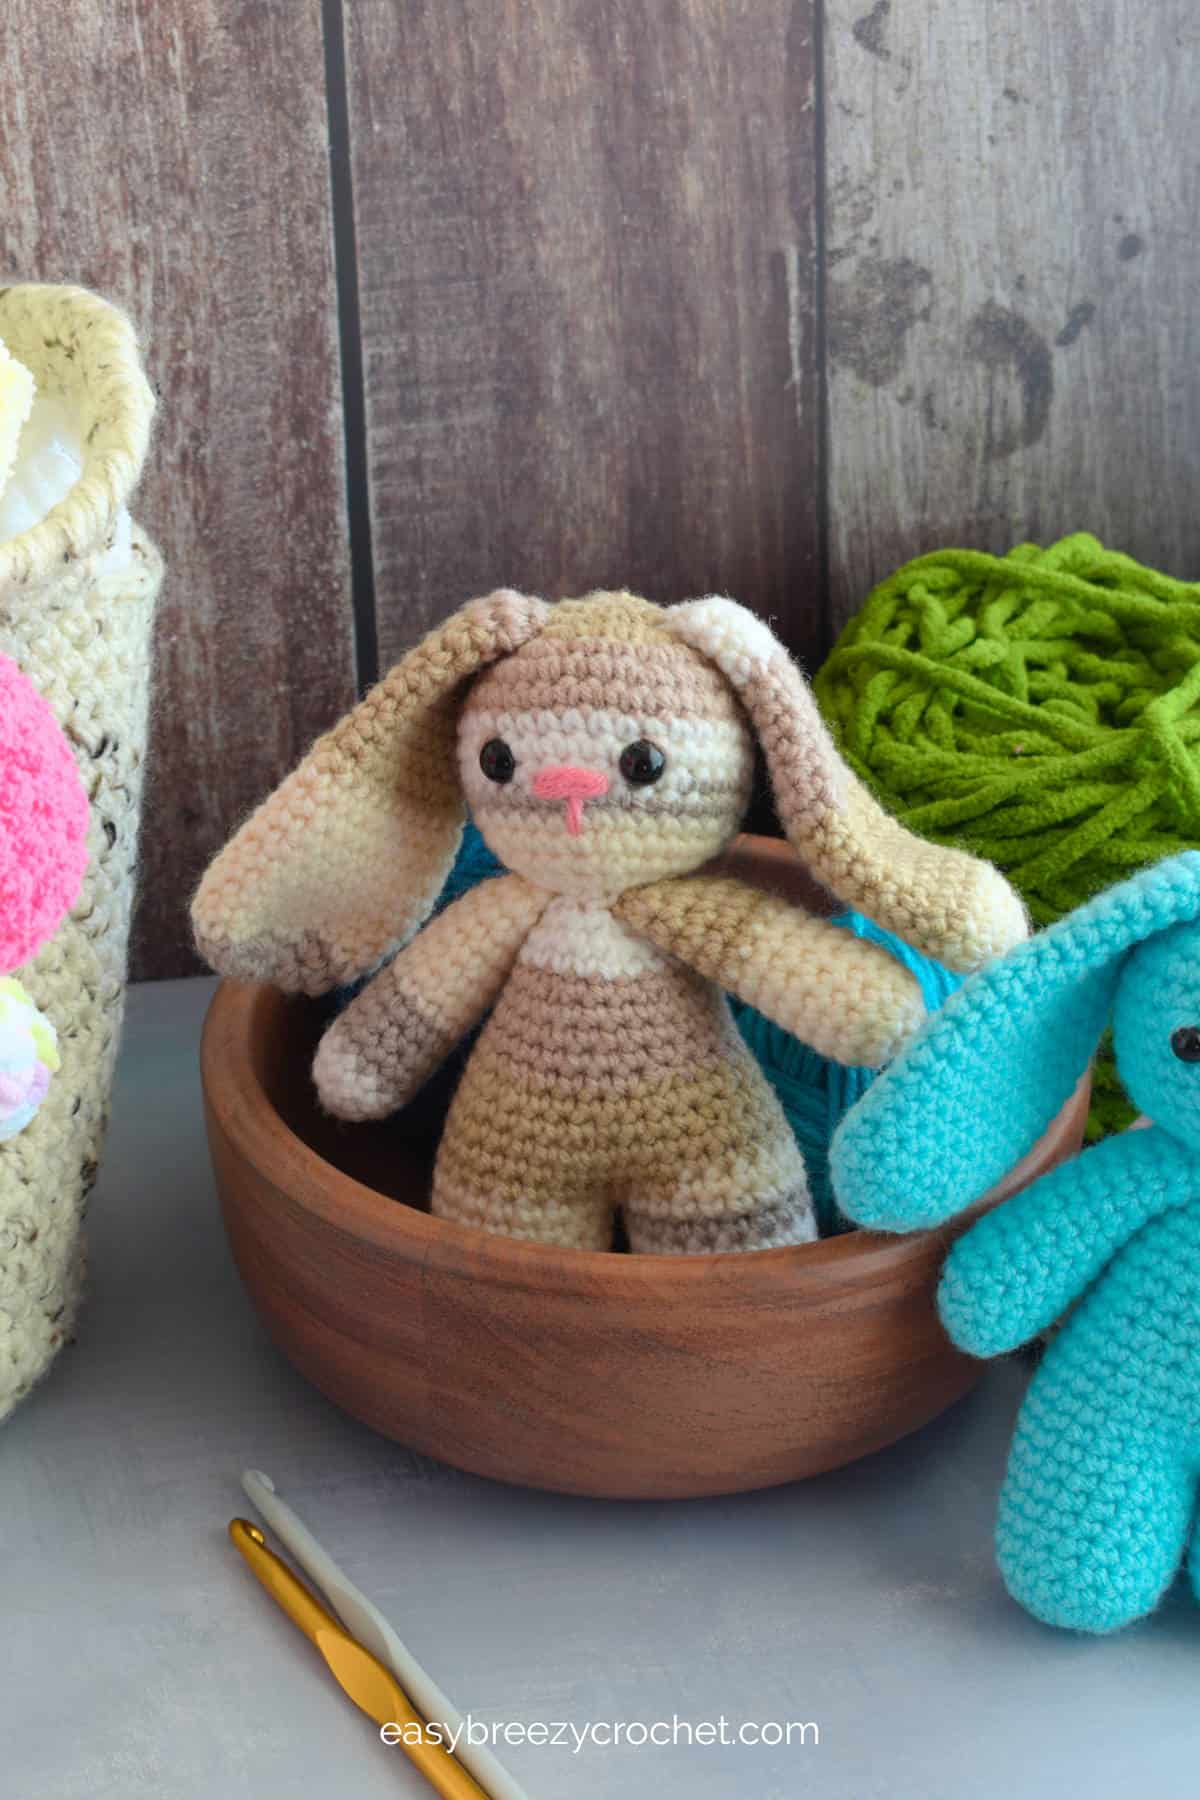 A brown multi colored bunny in a wooden bowl with crochet hooks in the foreground.